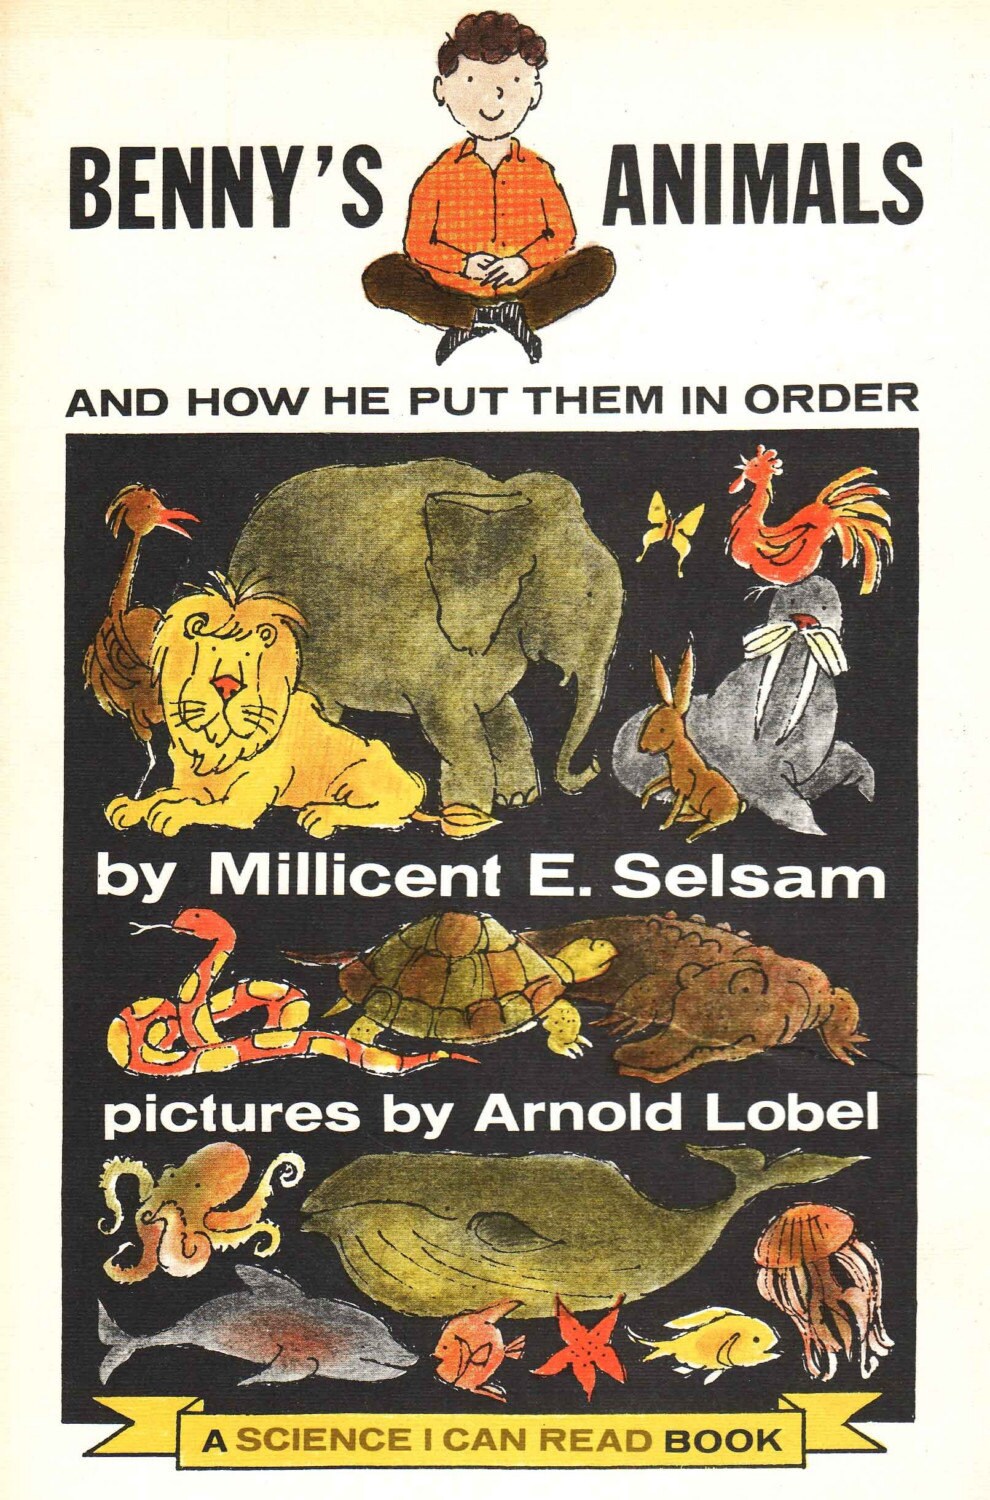 Benny's Animals And How He Put Them In Order (A Science I Can Read Book) Millicent E. Selsam and Arnold Lobel